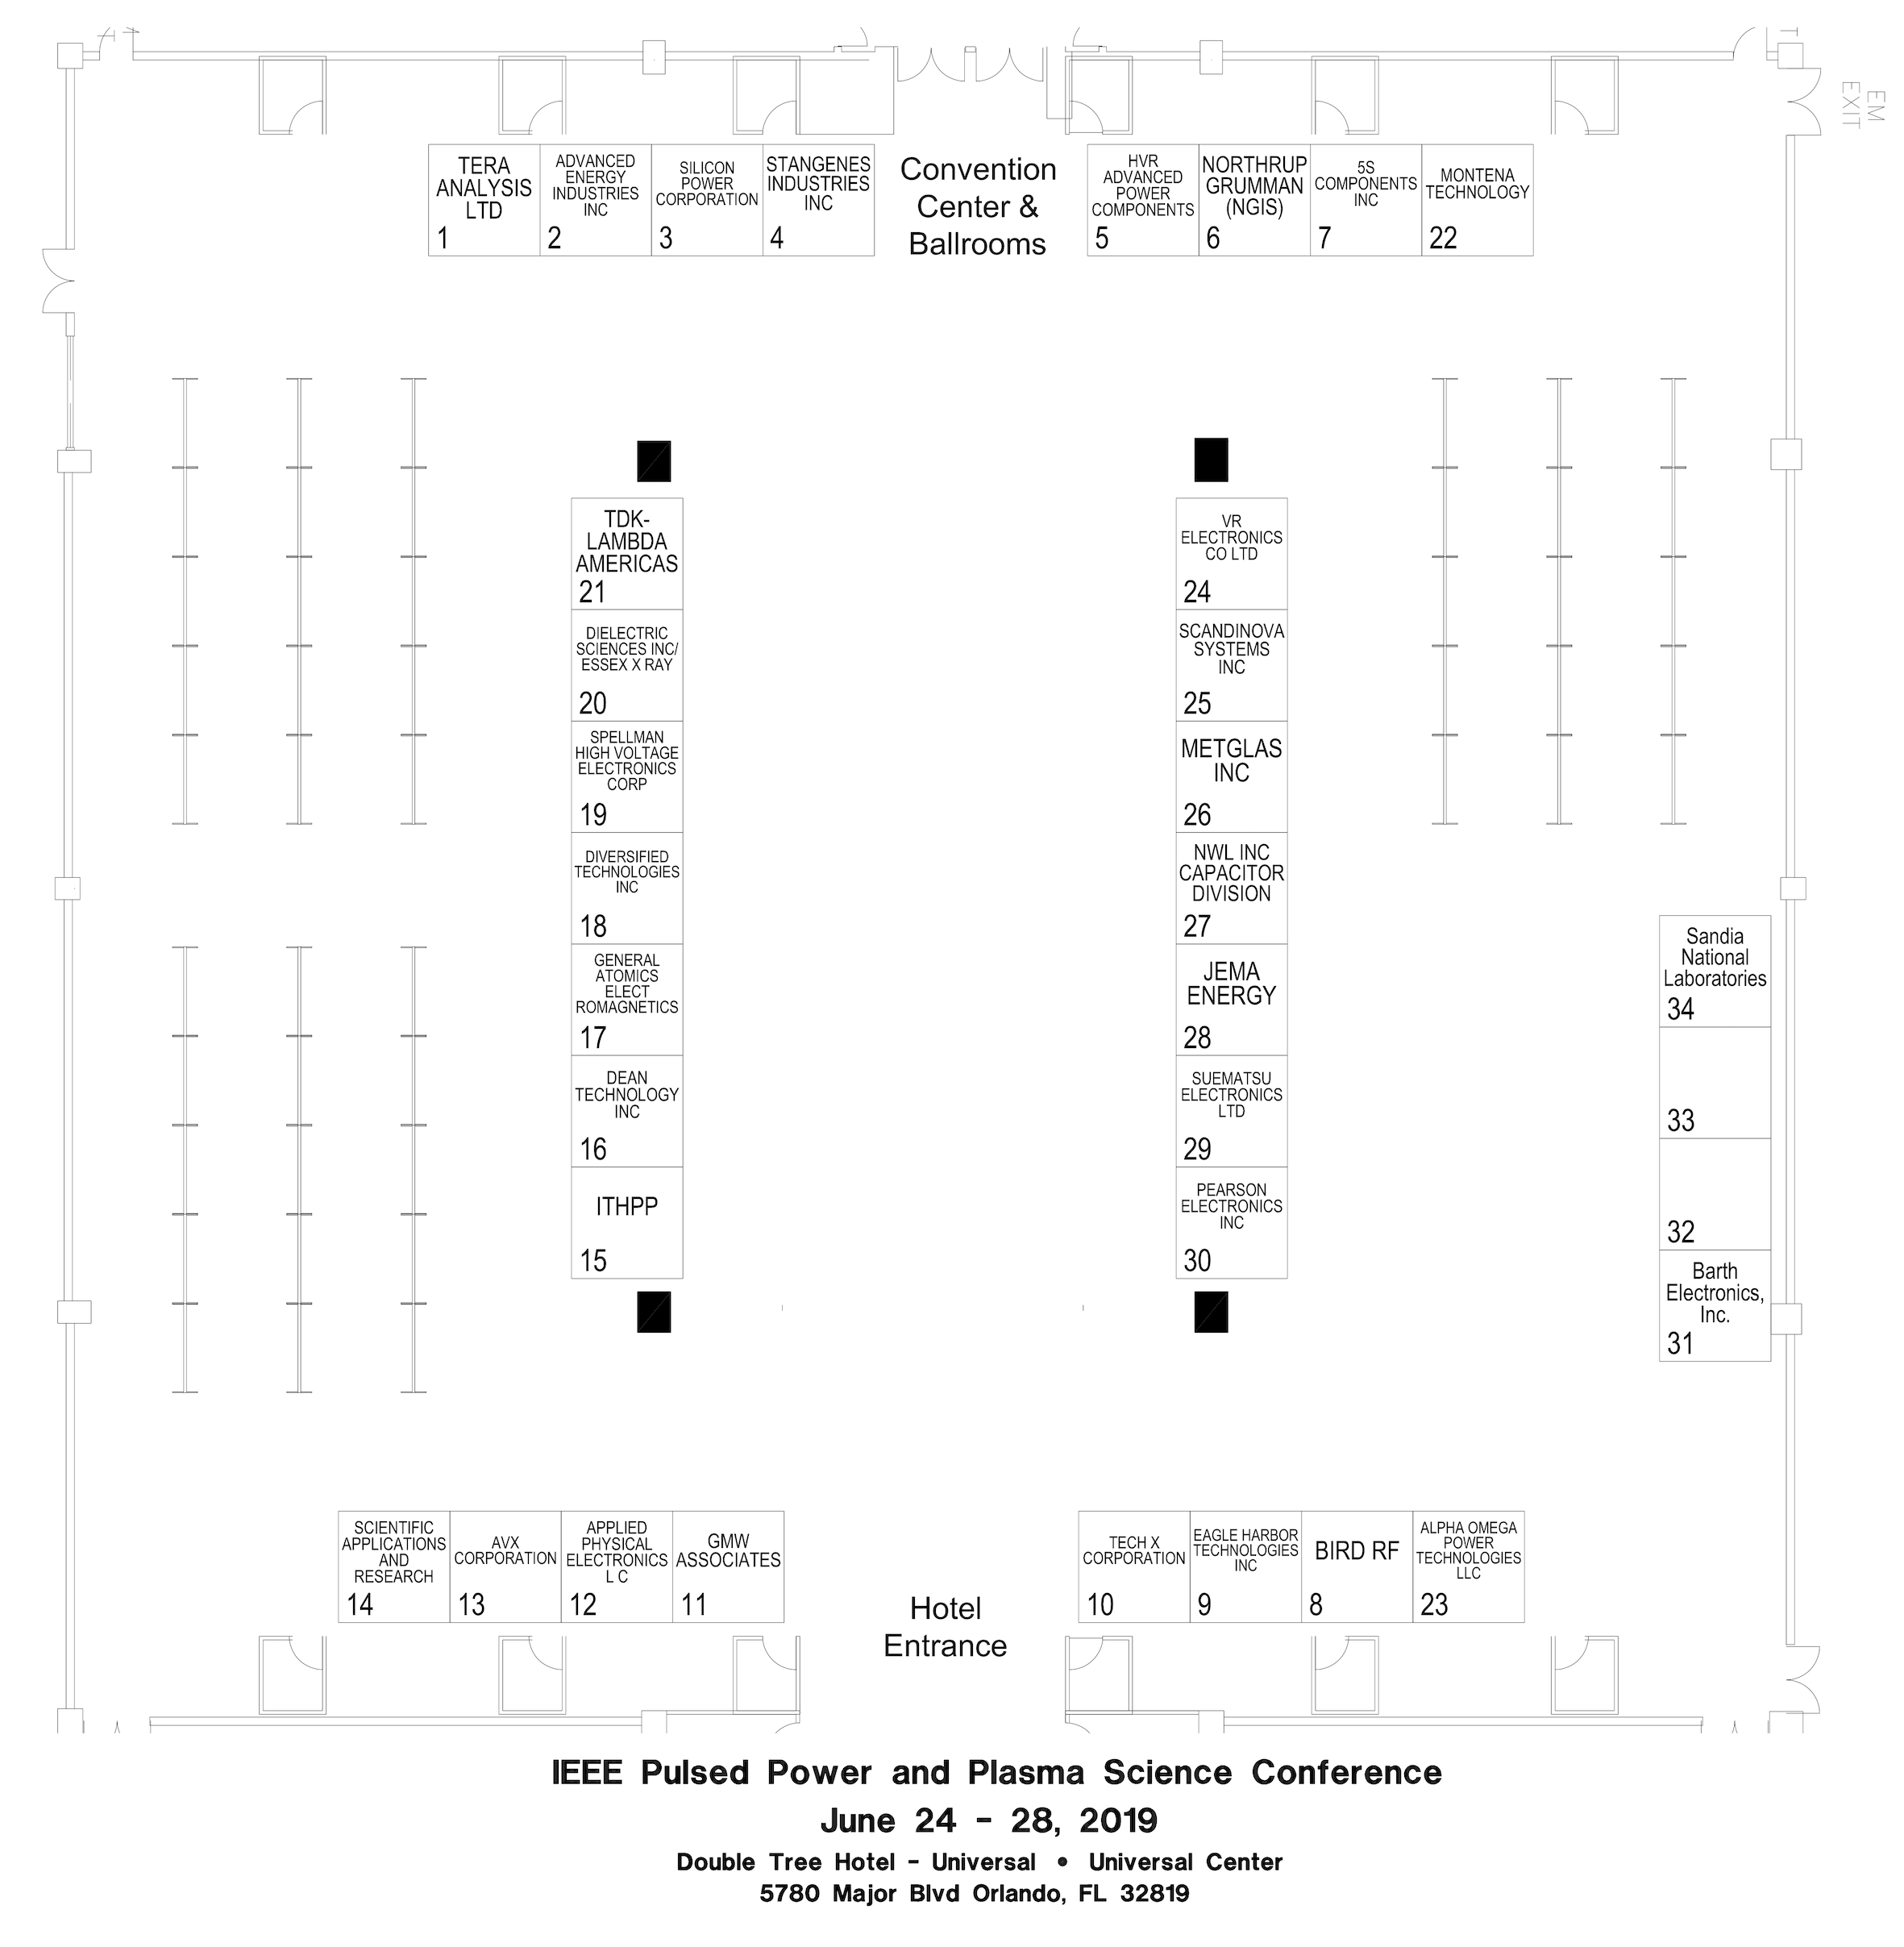 Exhibitor Booth Locations